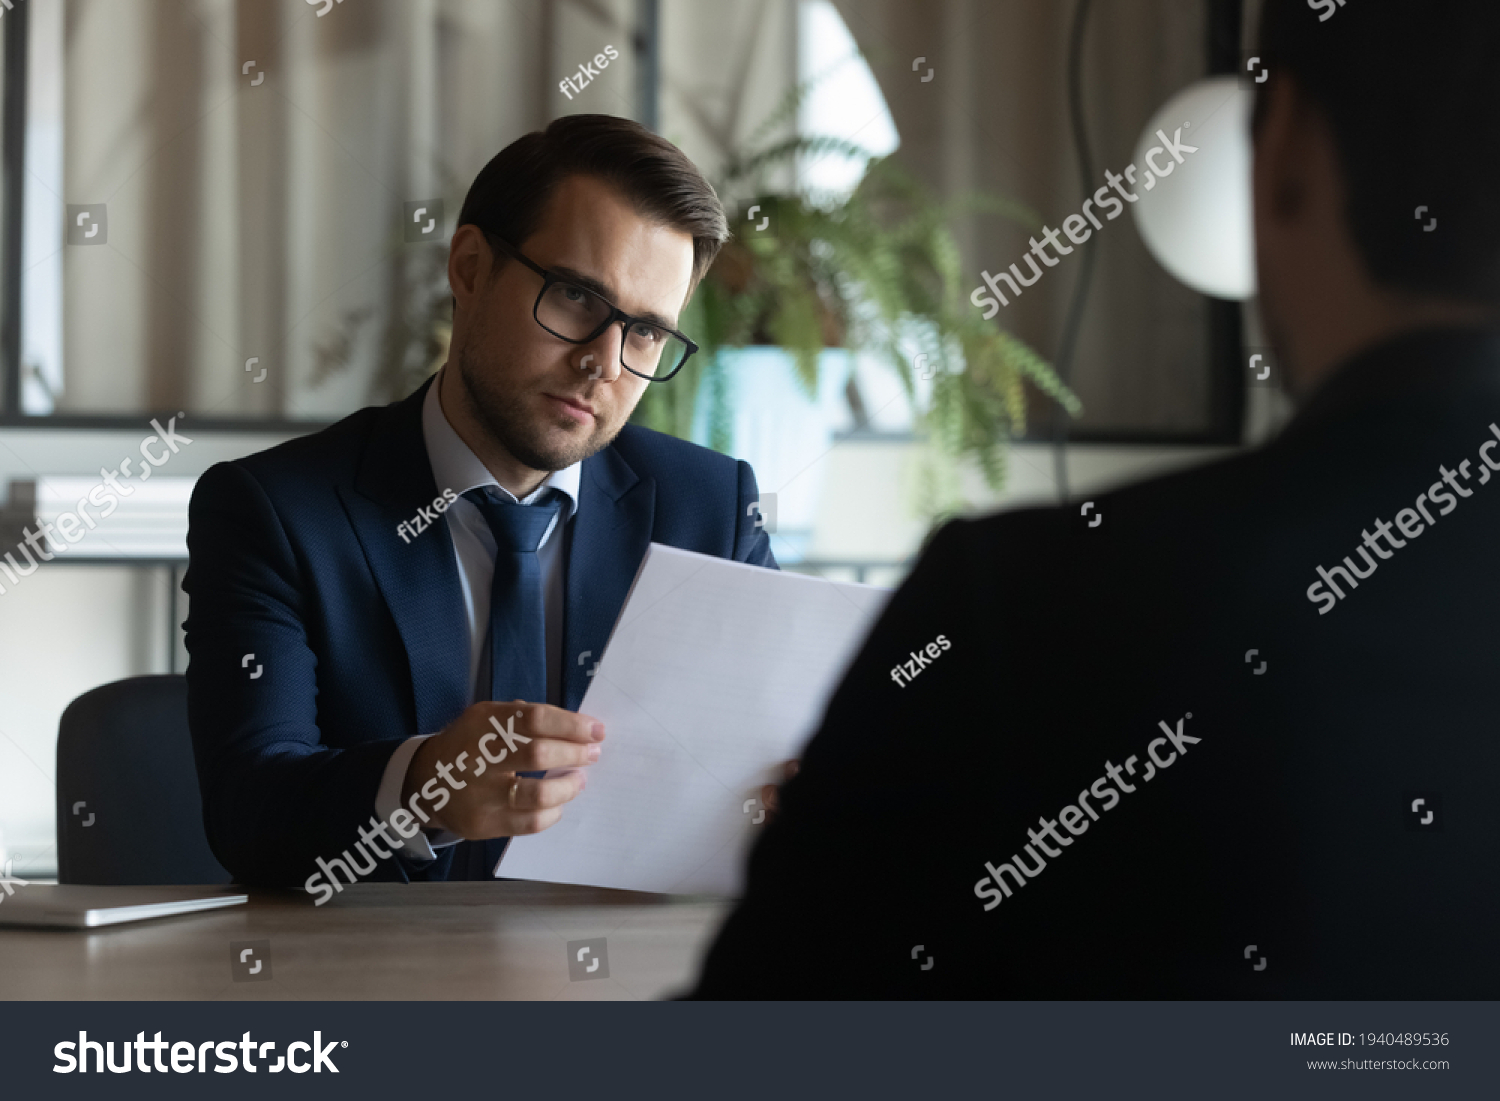 Young Caucasian businessman listen to male job applicant candidate at interview in office. Business partners or clients consider collaboration partnership at briefing. Cooperation, employment concept. #1940489536